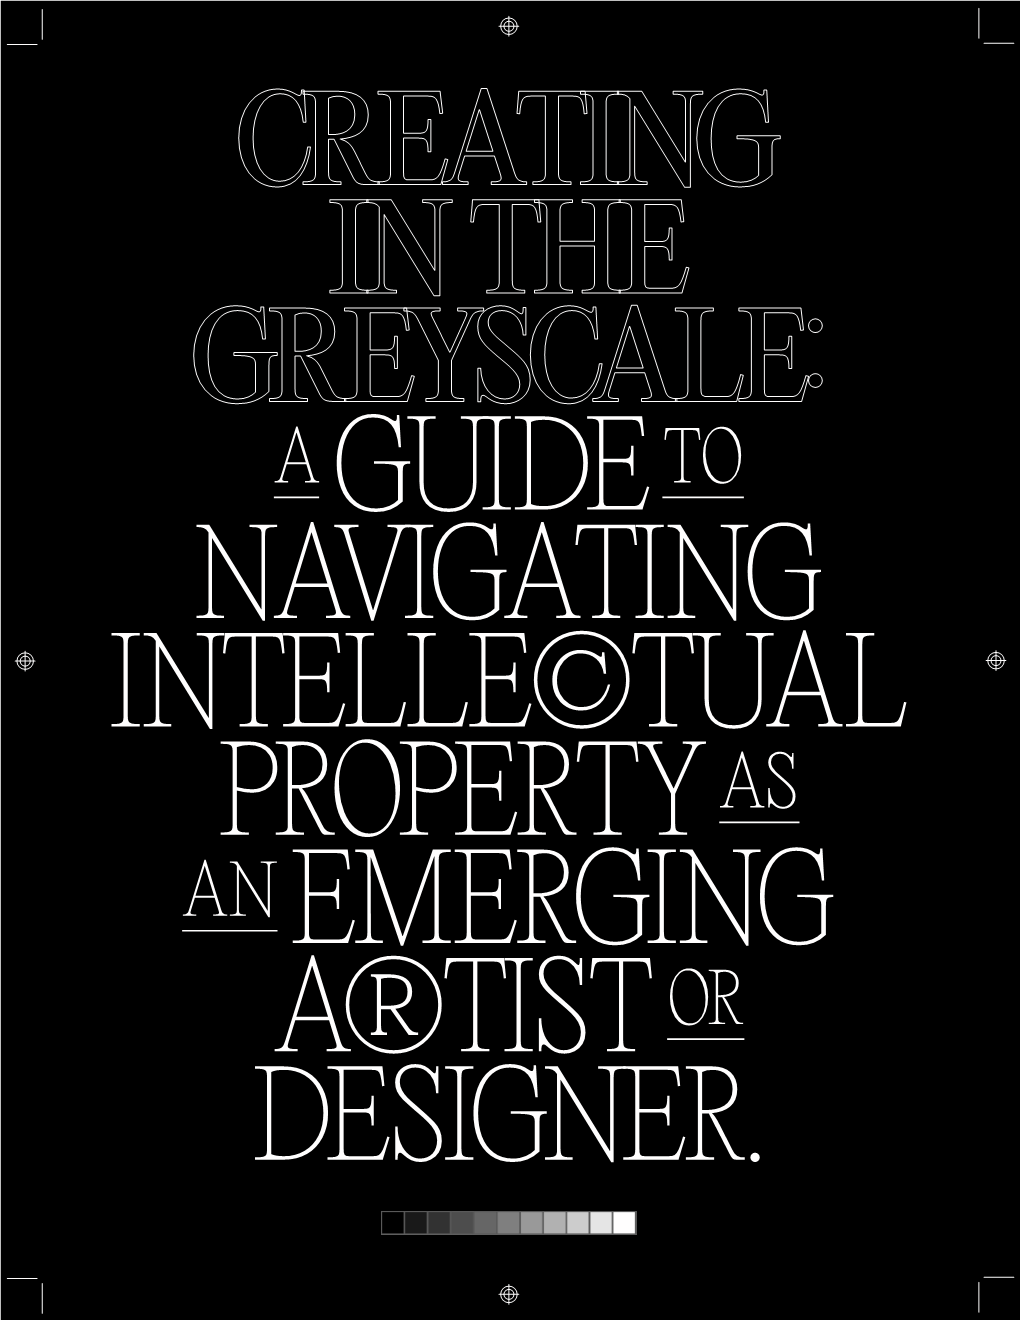 Creating in the Greyscale: a Guide to Navigating Intellectual Property As